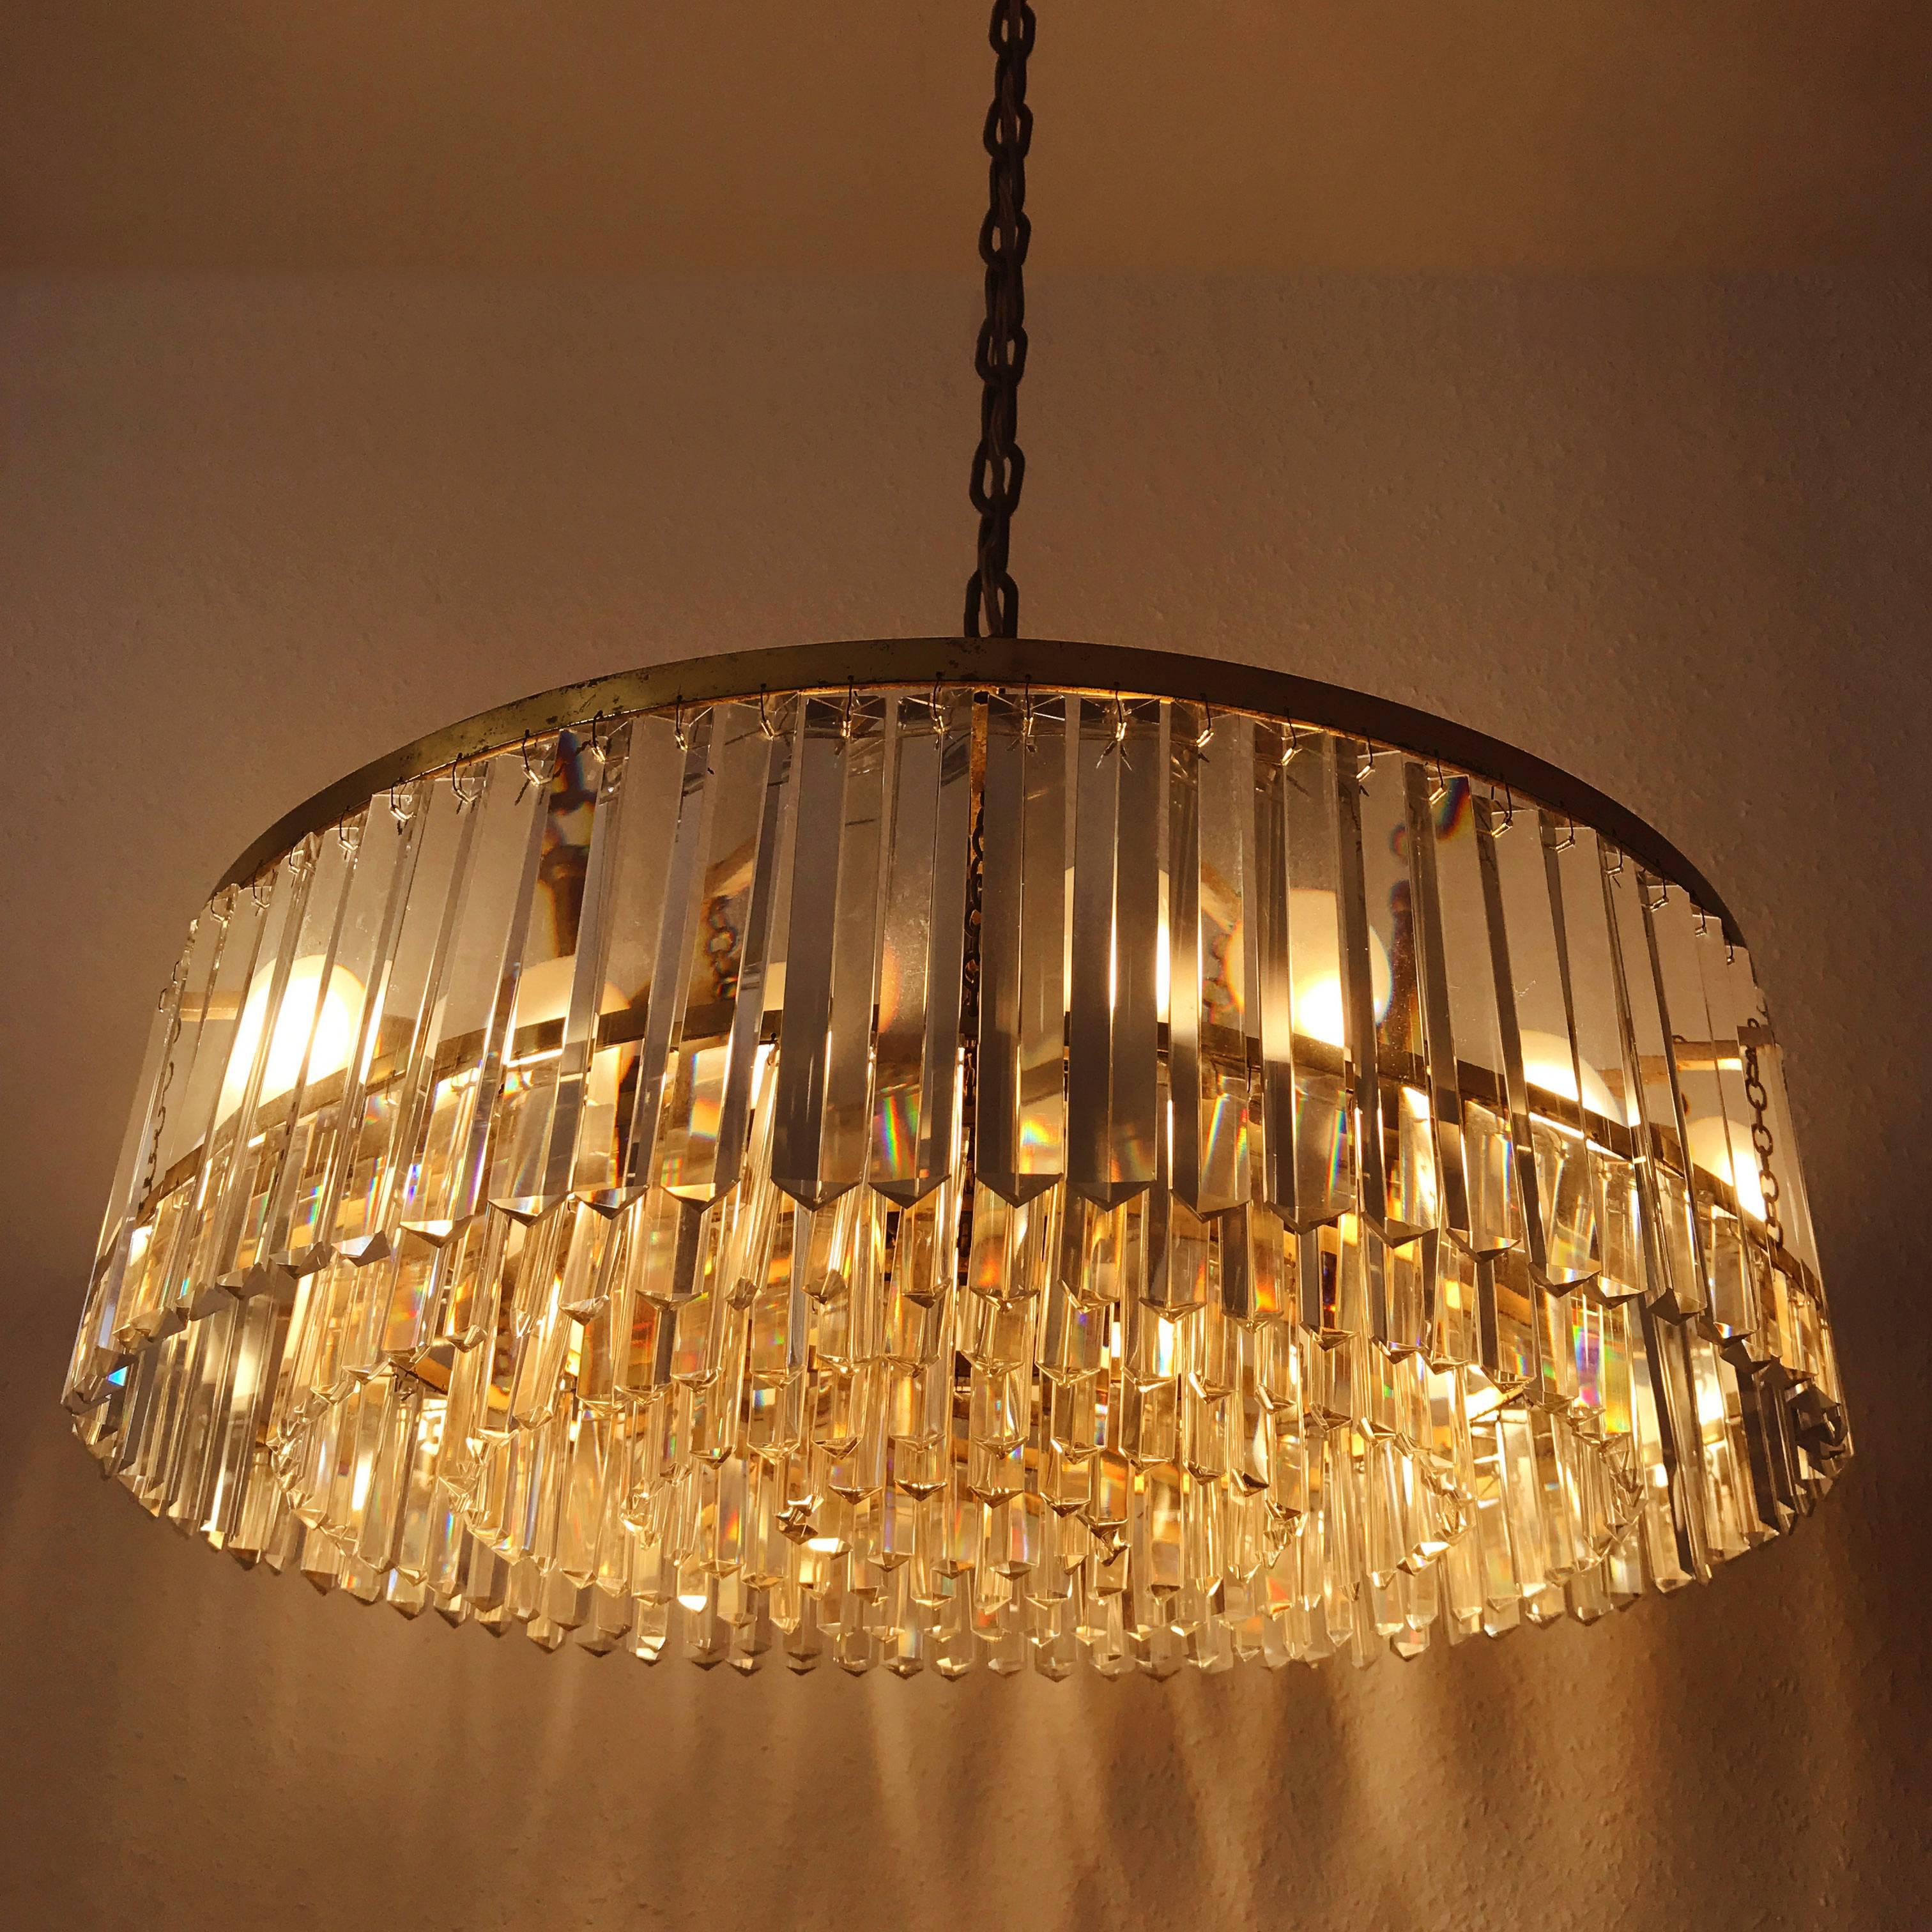 Mid-20th Century XL Crystal Glass Chandelier or Pendant Lamp by Bakalowits & Söhne Vienna 1950s